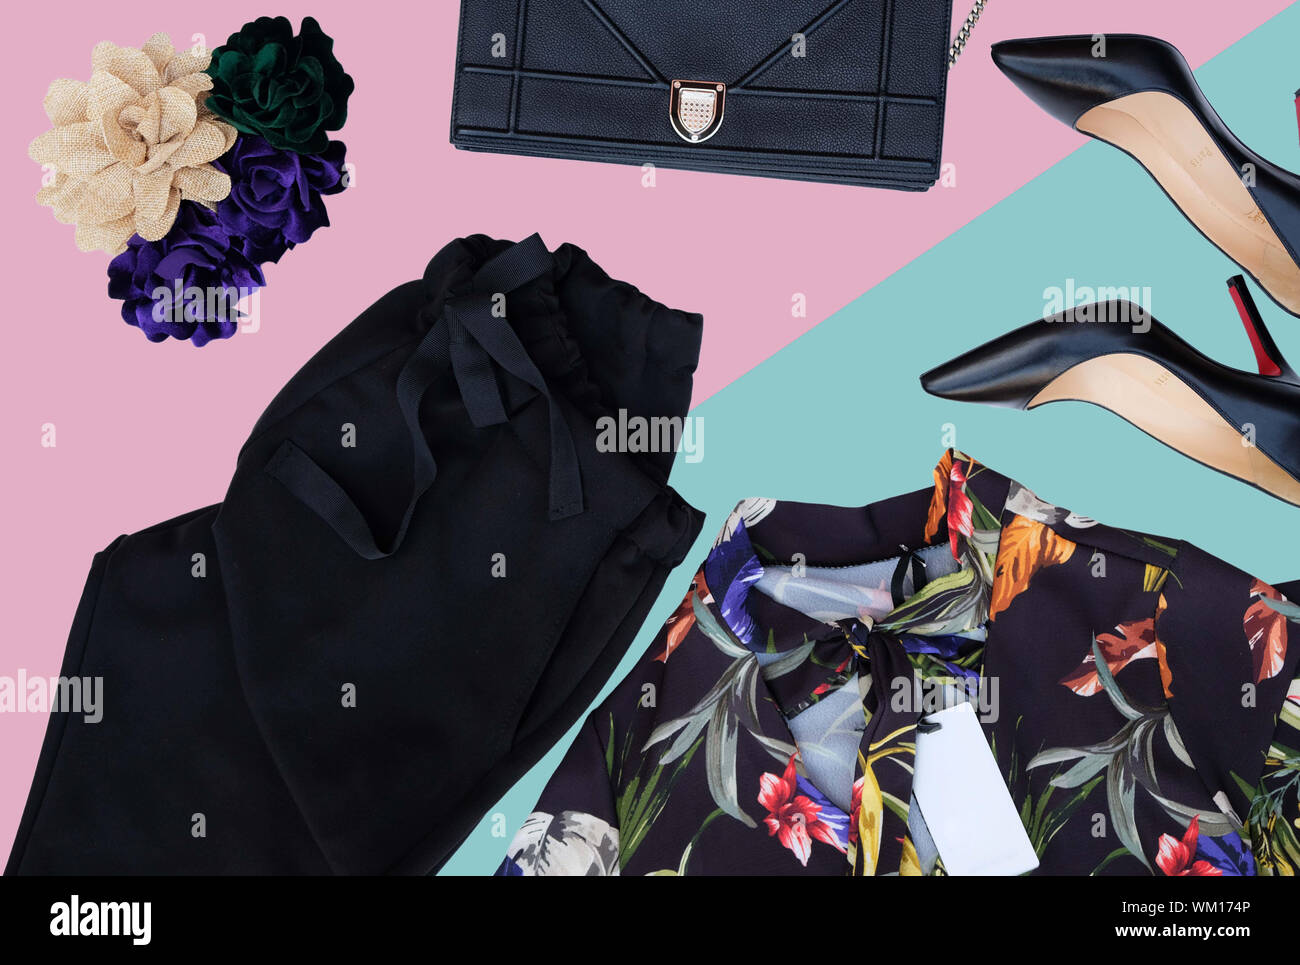 flat lay fashion set of black trausers, floreal shirt, black leather clutch bag, black hills and flower pins over pink and turquoise blue background Stock Photo